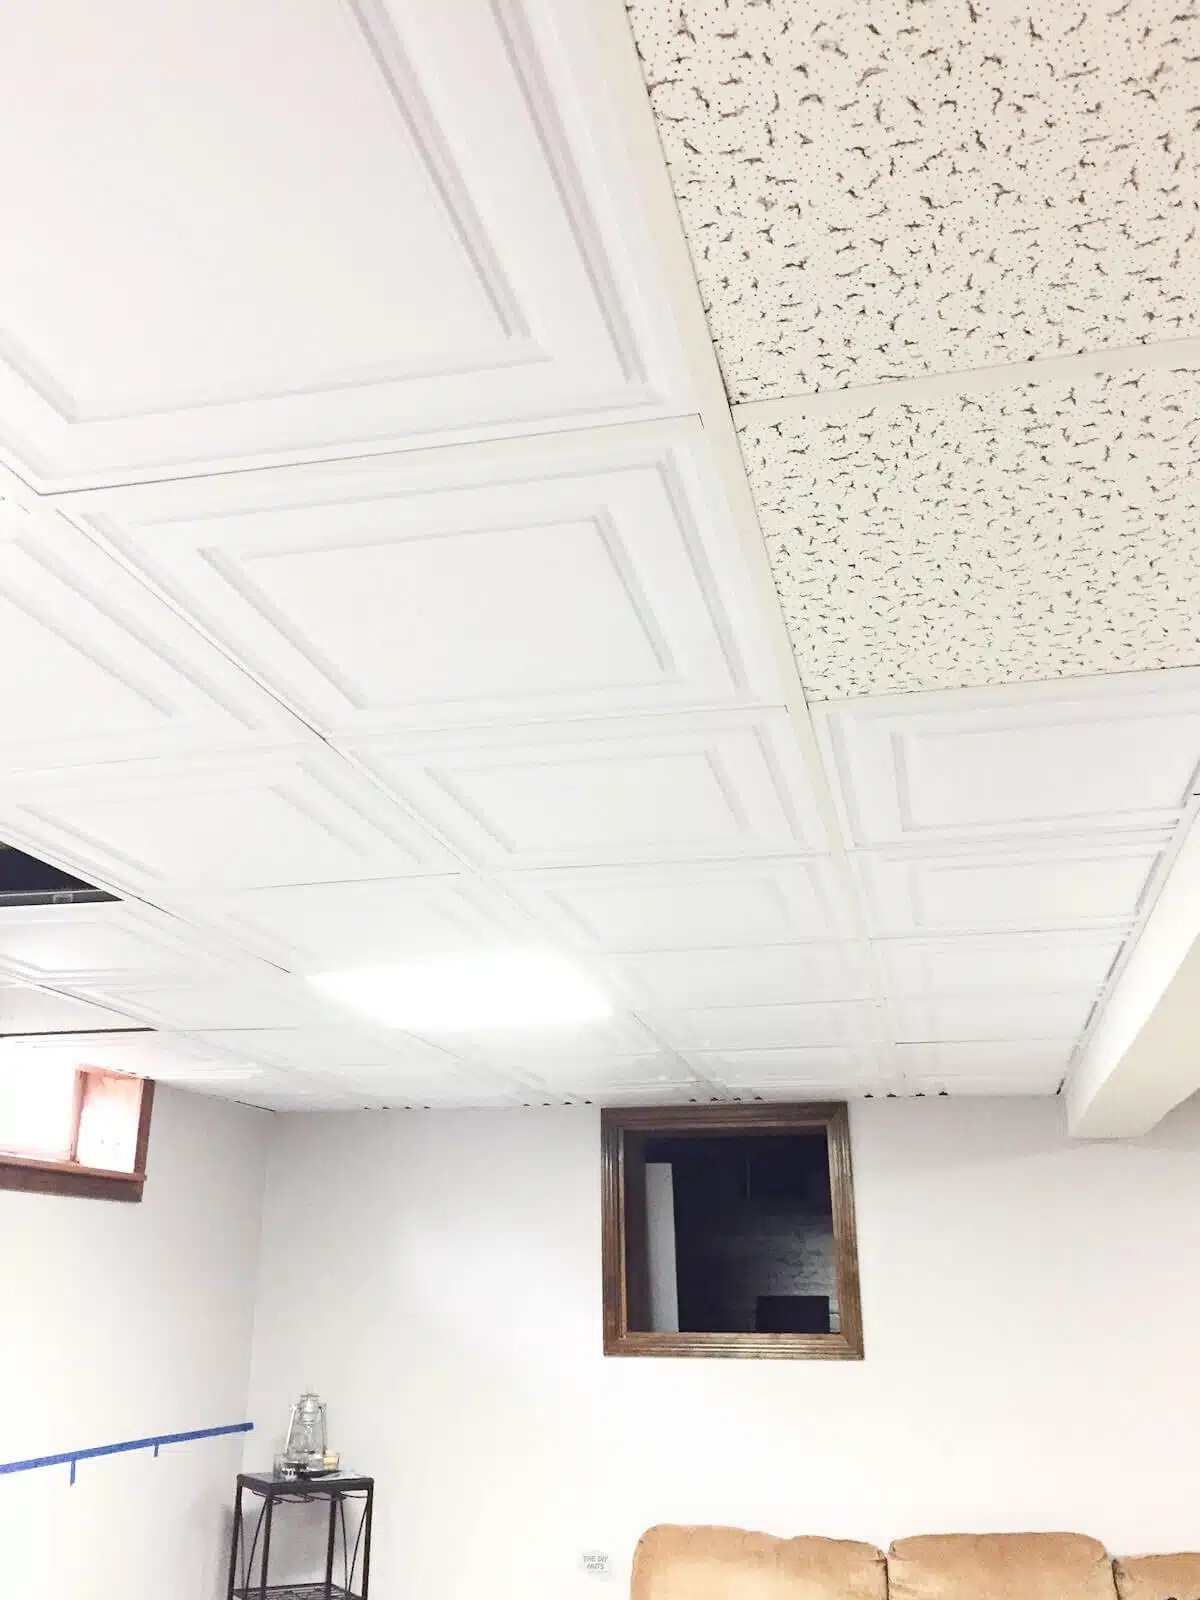 new drop ceiling tiles on part of ceiling with old ones in two spots in basement.